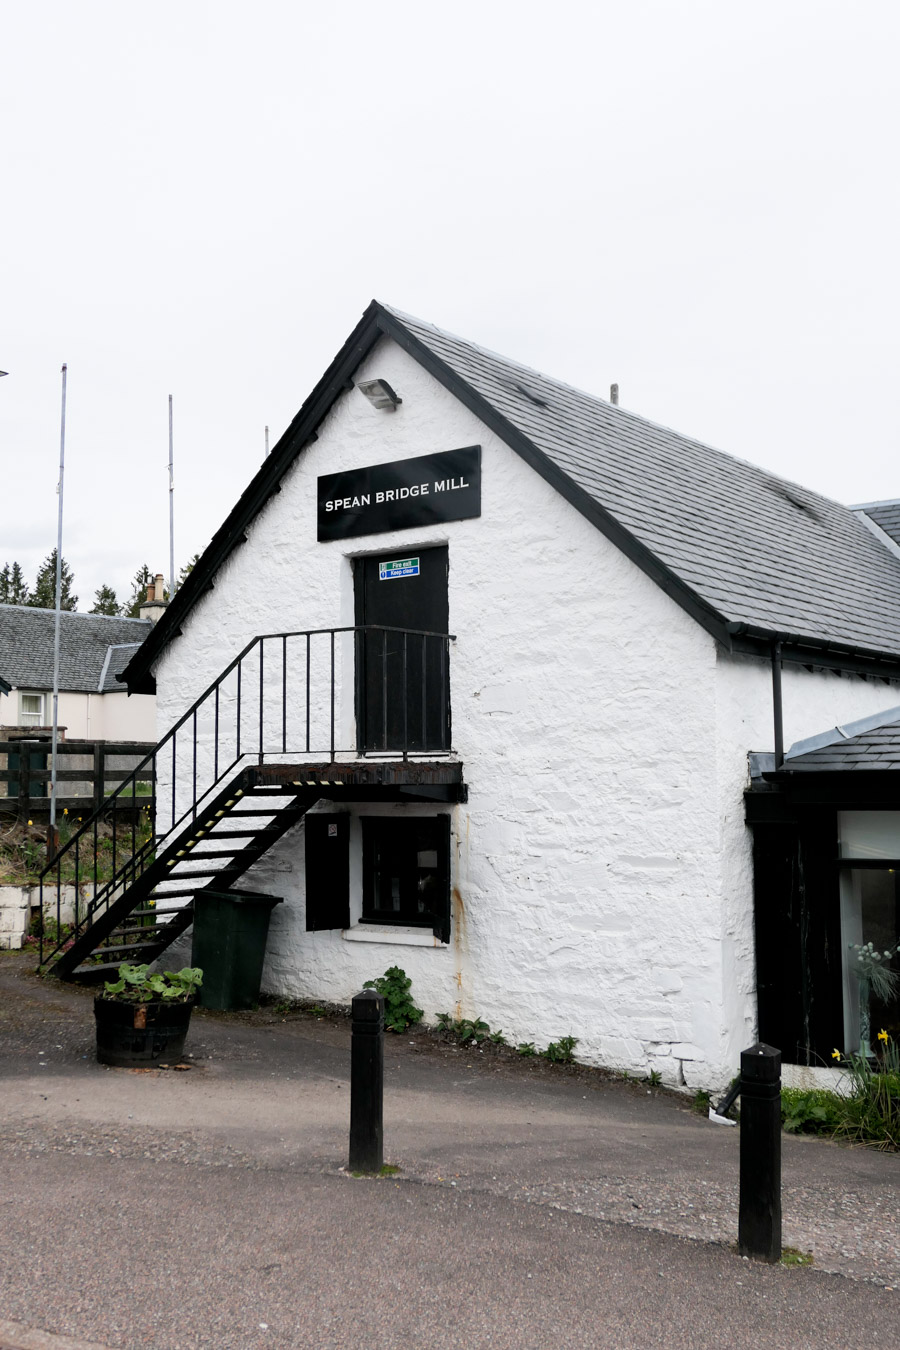 What to Do in Fort William Travel Guide - Day Trips from Fort William - Spean Bridge Mill